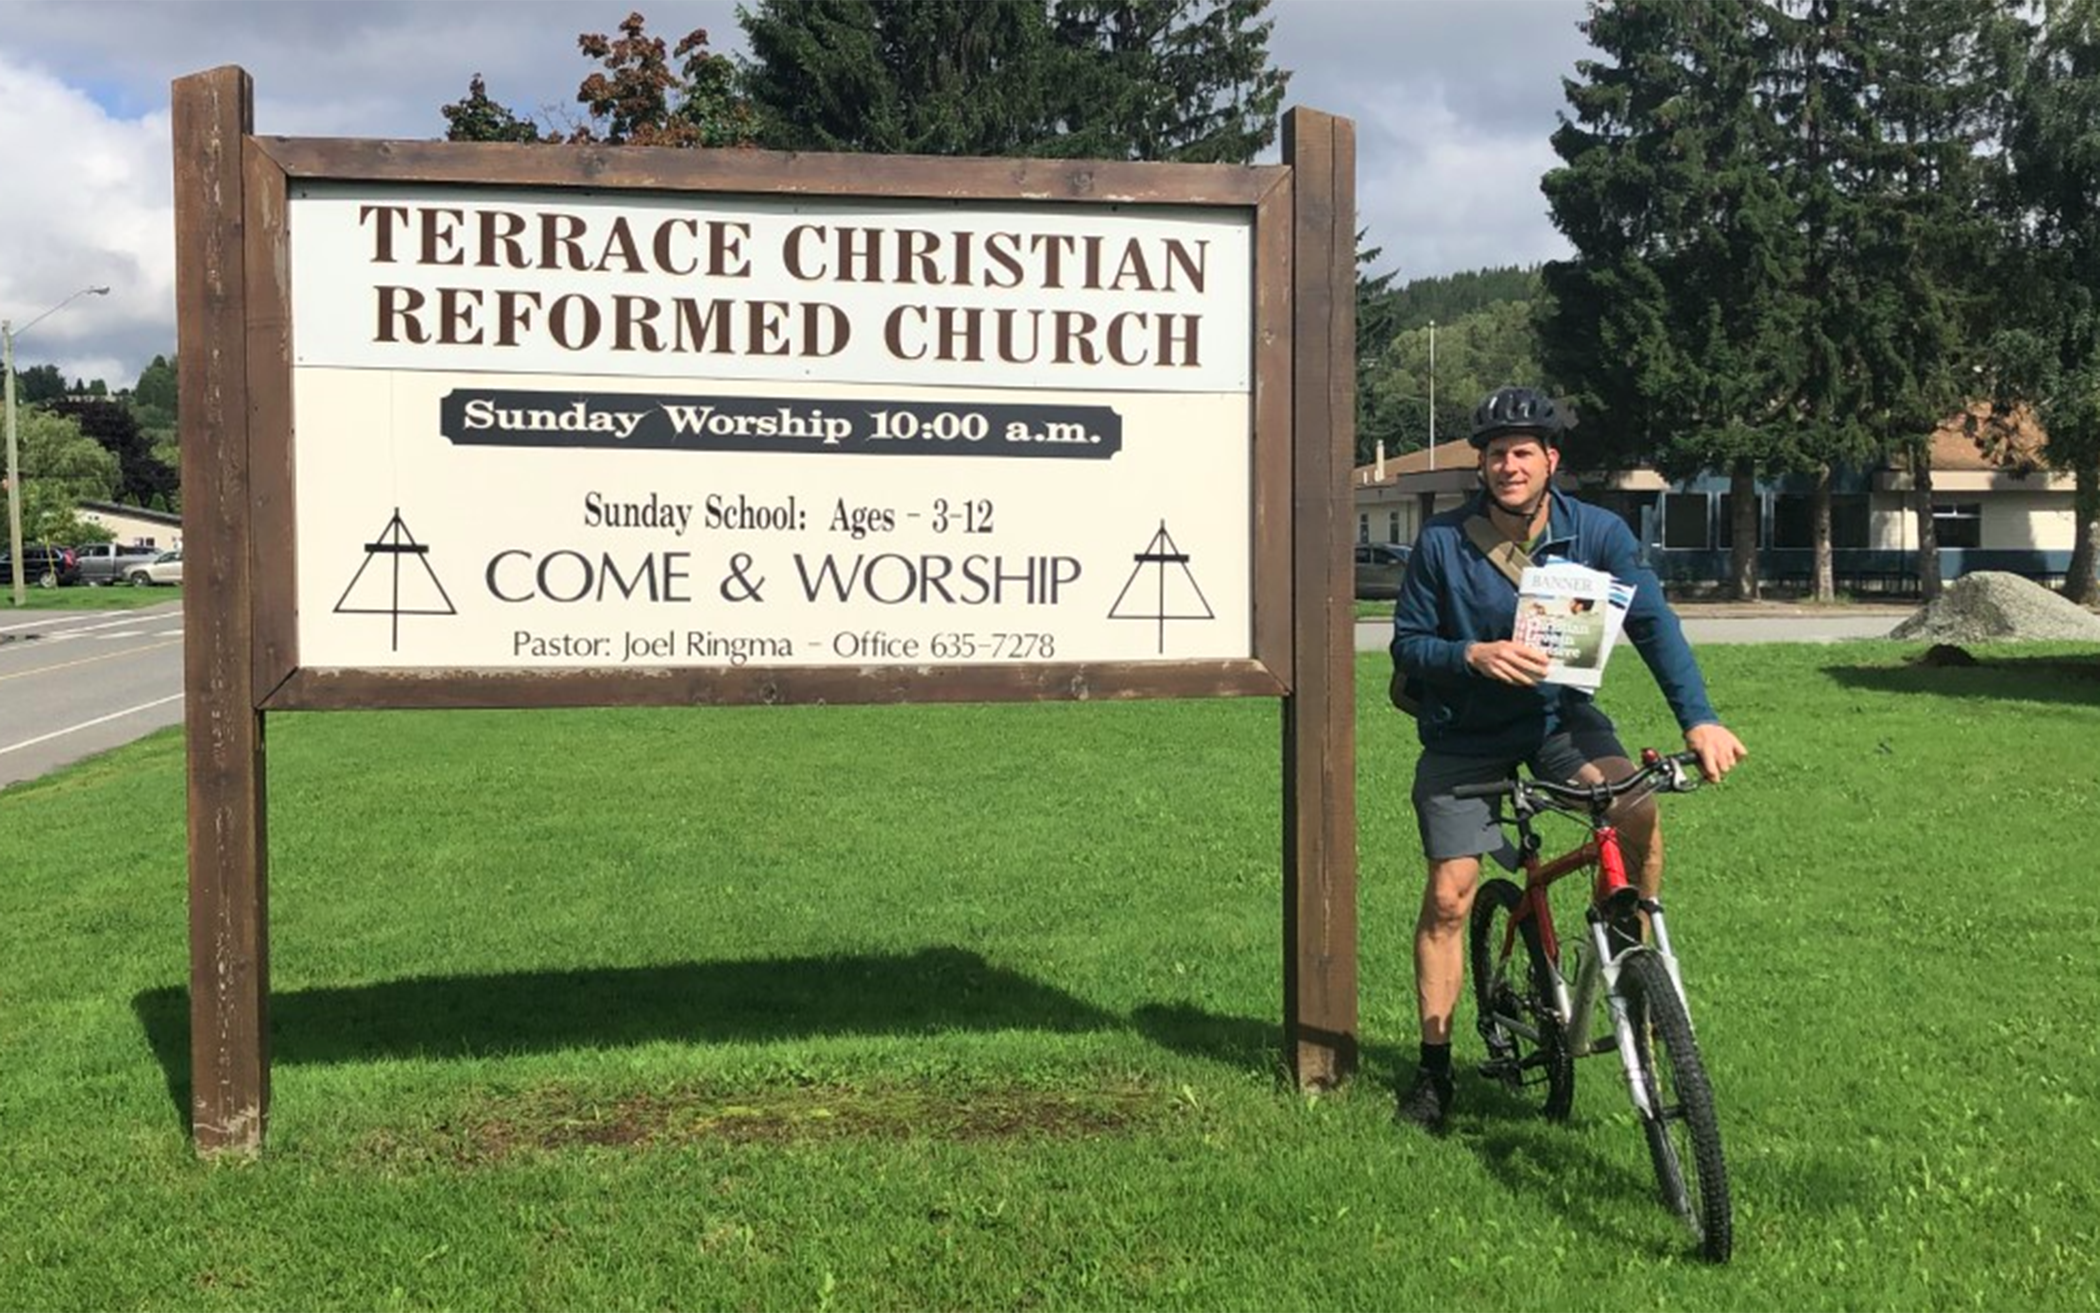 B.C. Pastor Delivers Banner, Visits Congregants by Bicycle